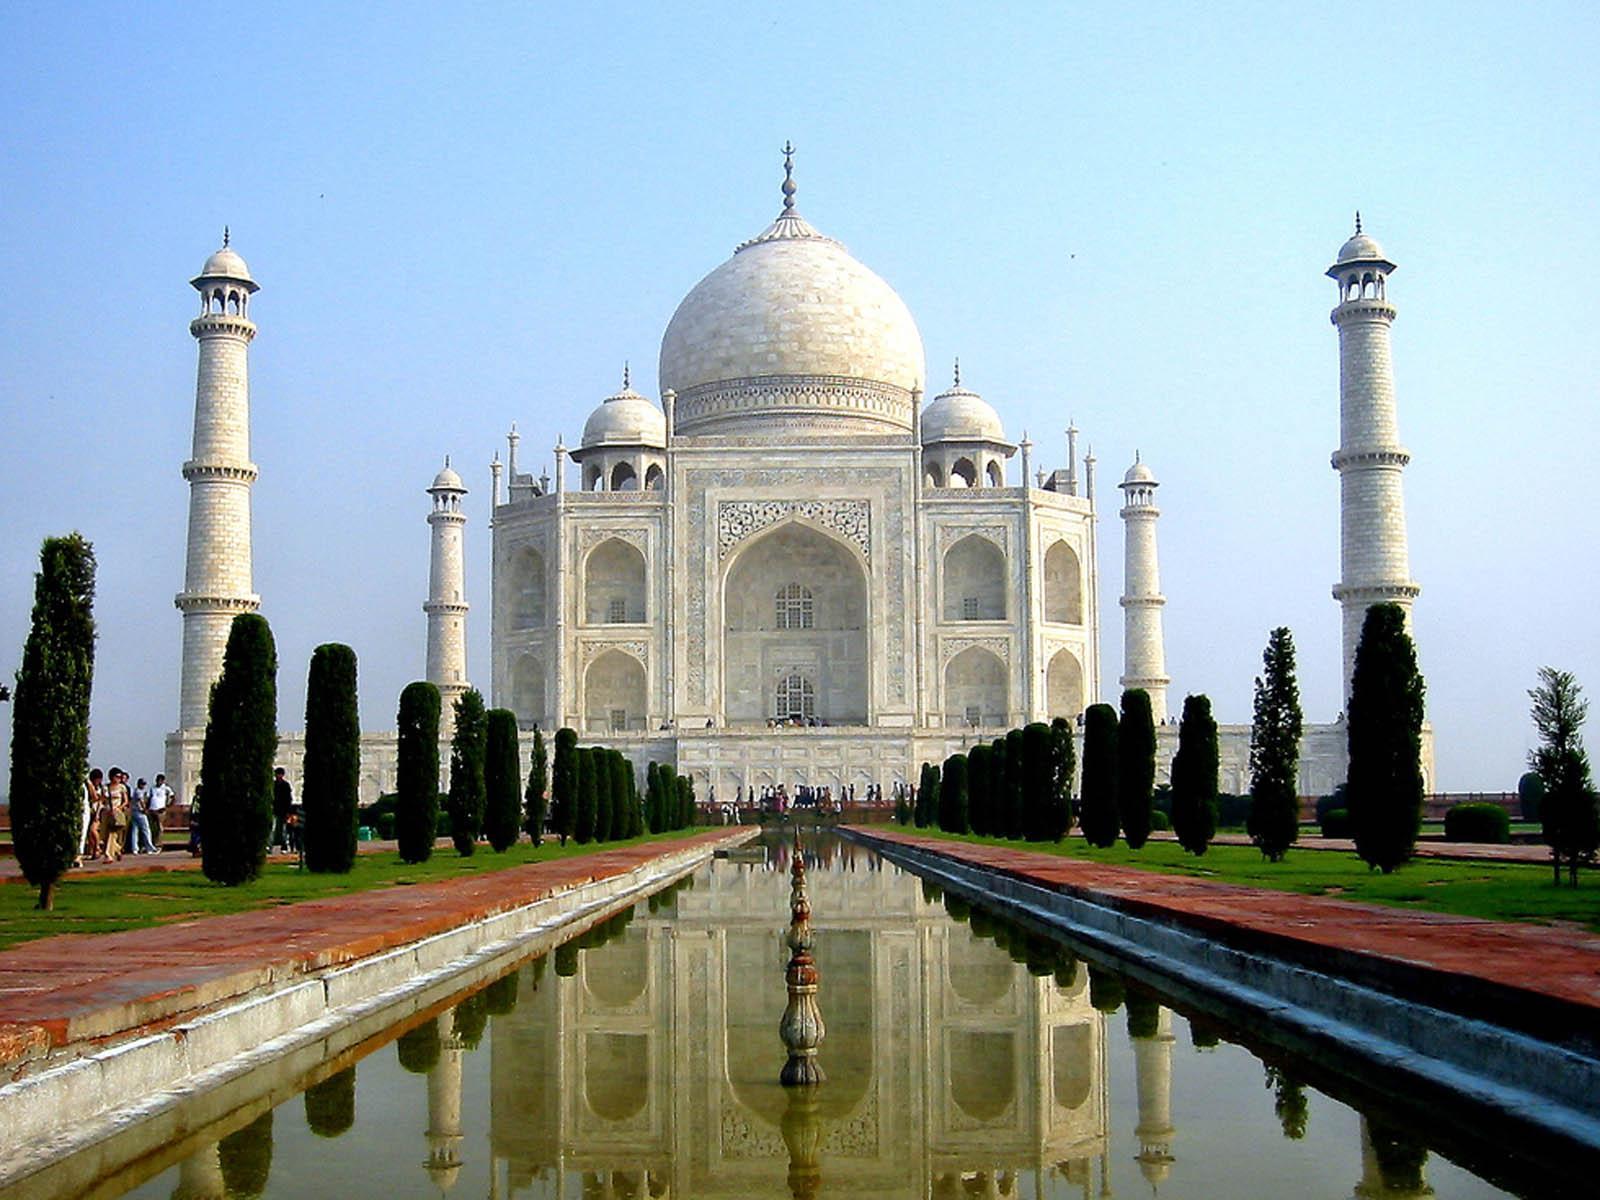 Photos of Taj Mahal in India, The Most Romantic Place in the